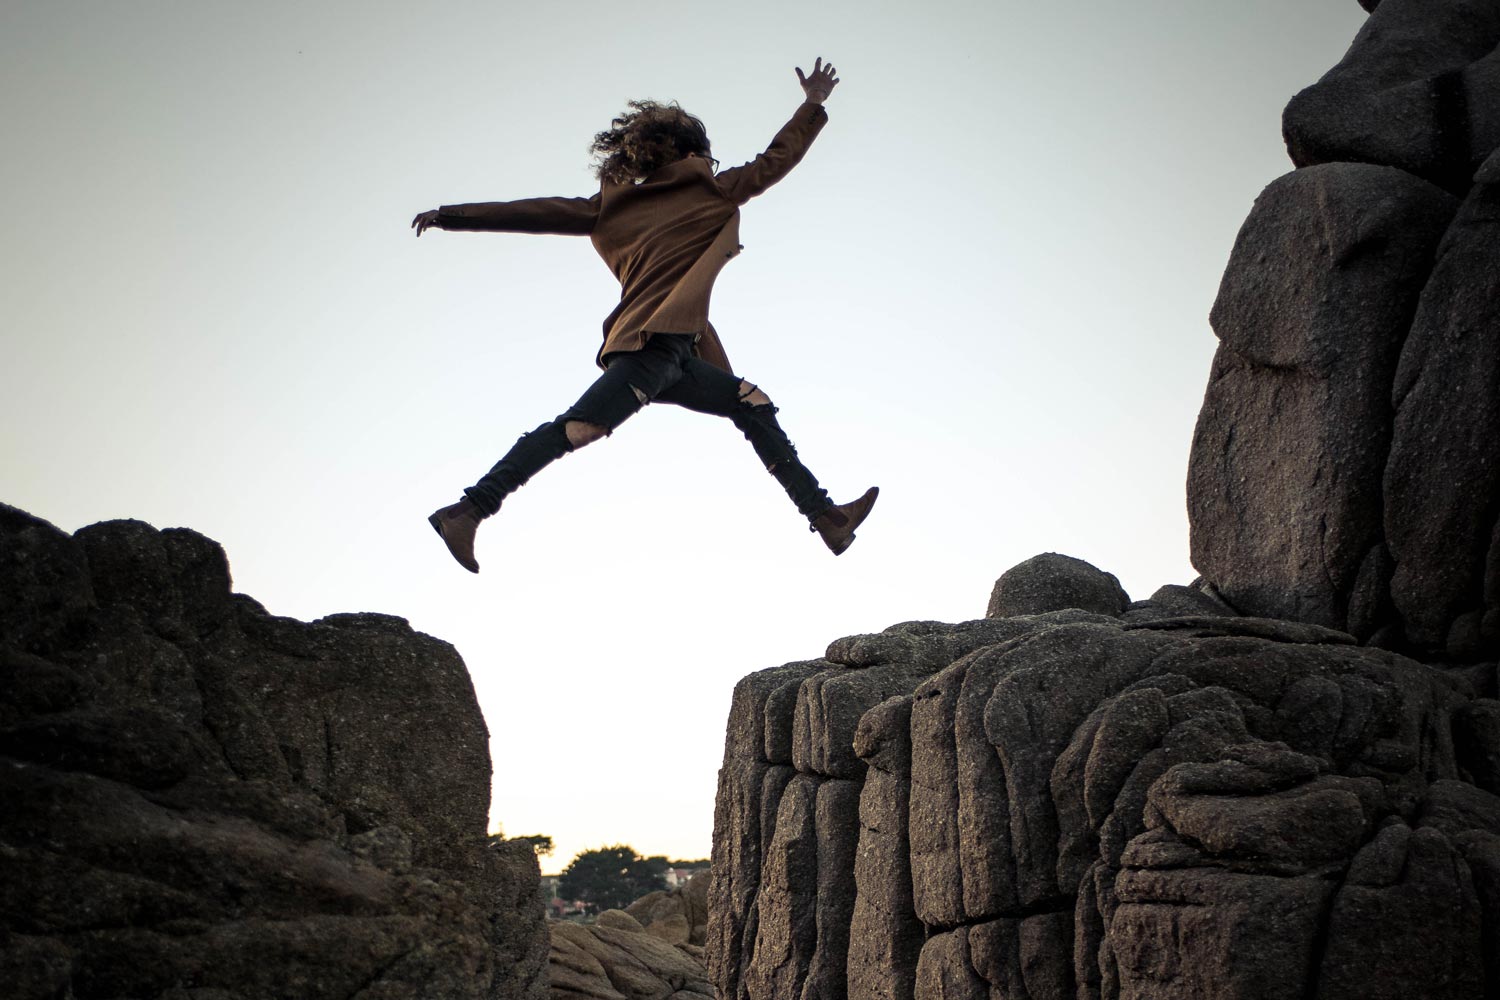 Silhouette of person jumping between two rock ledges